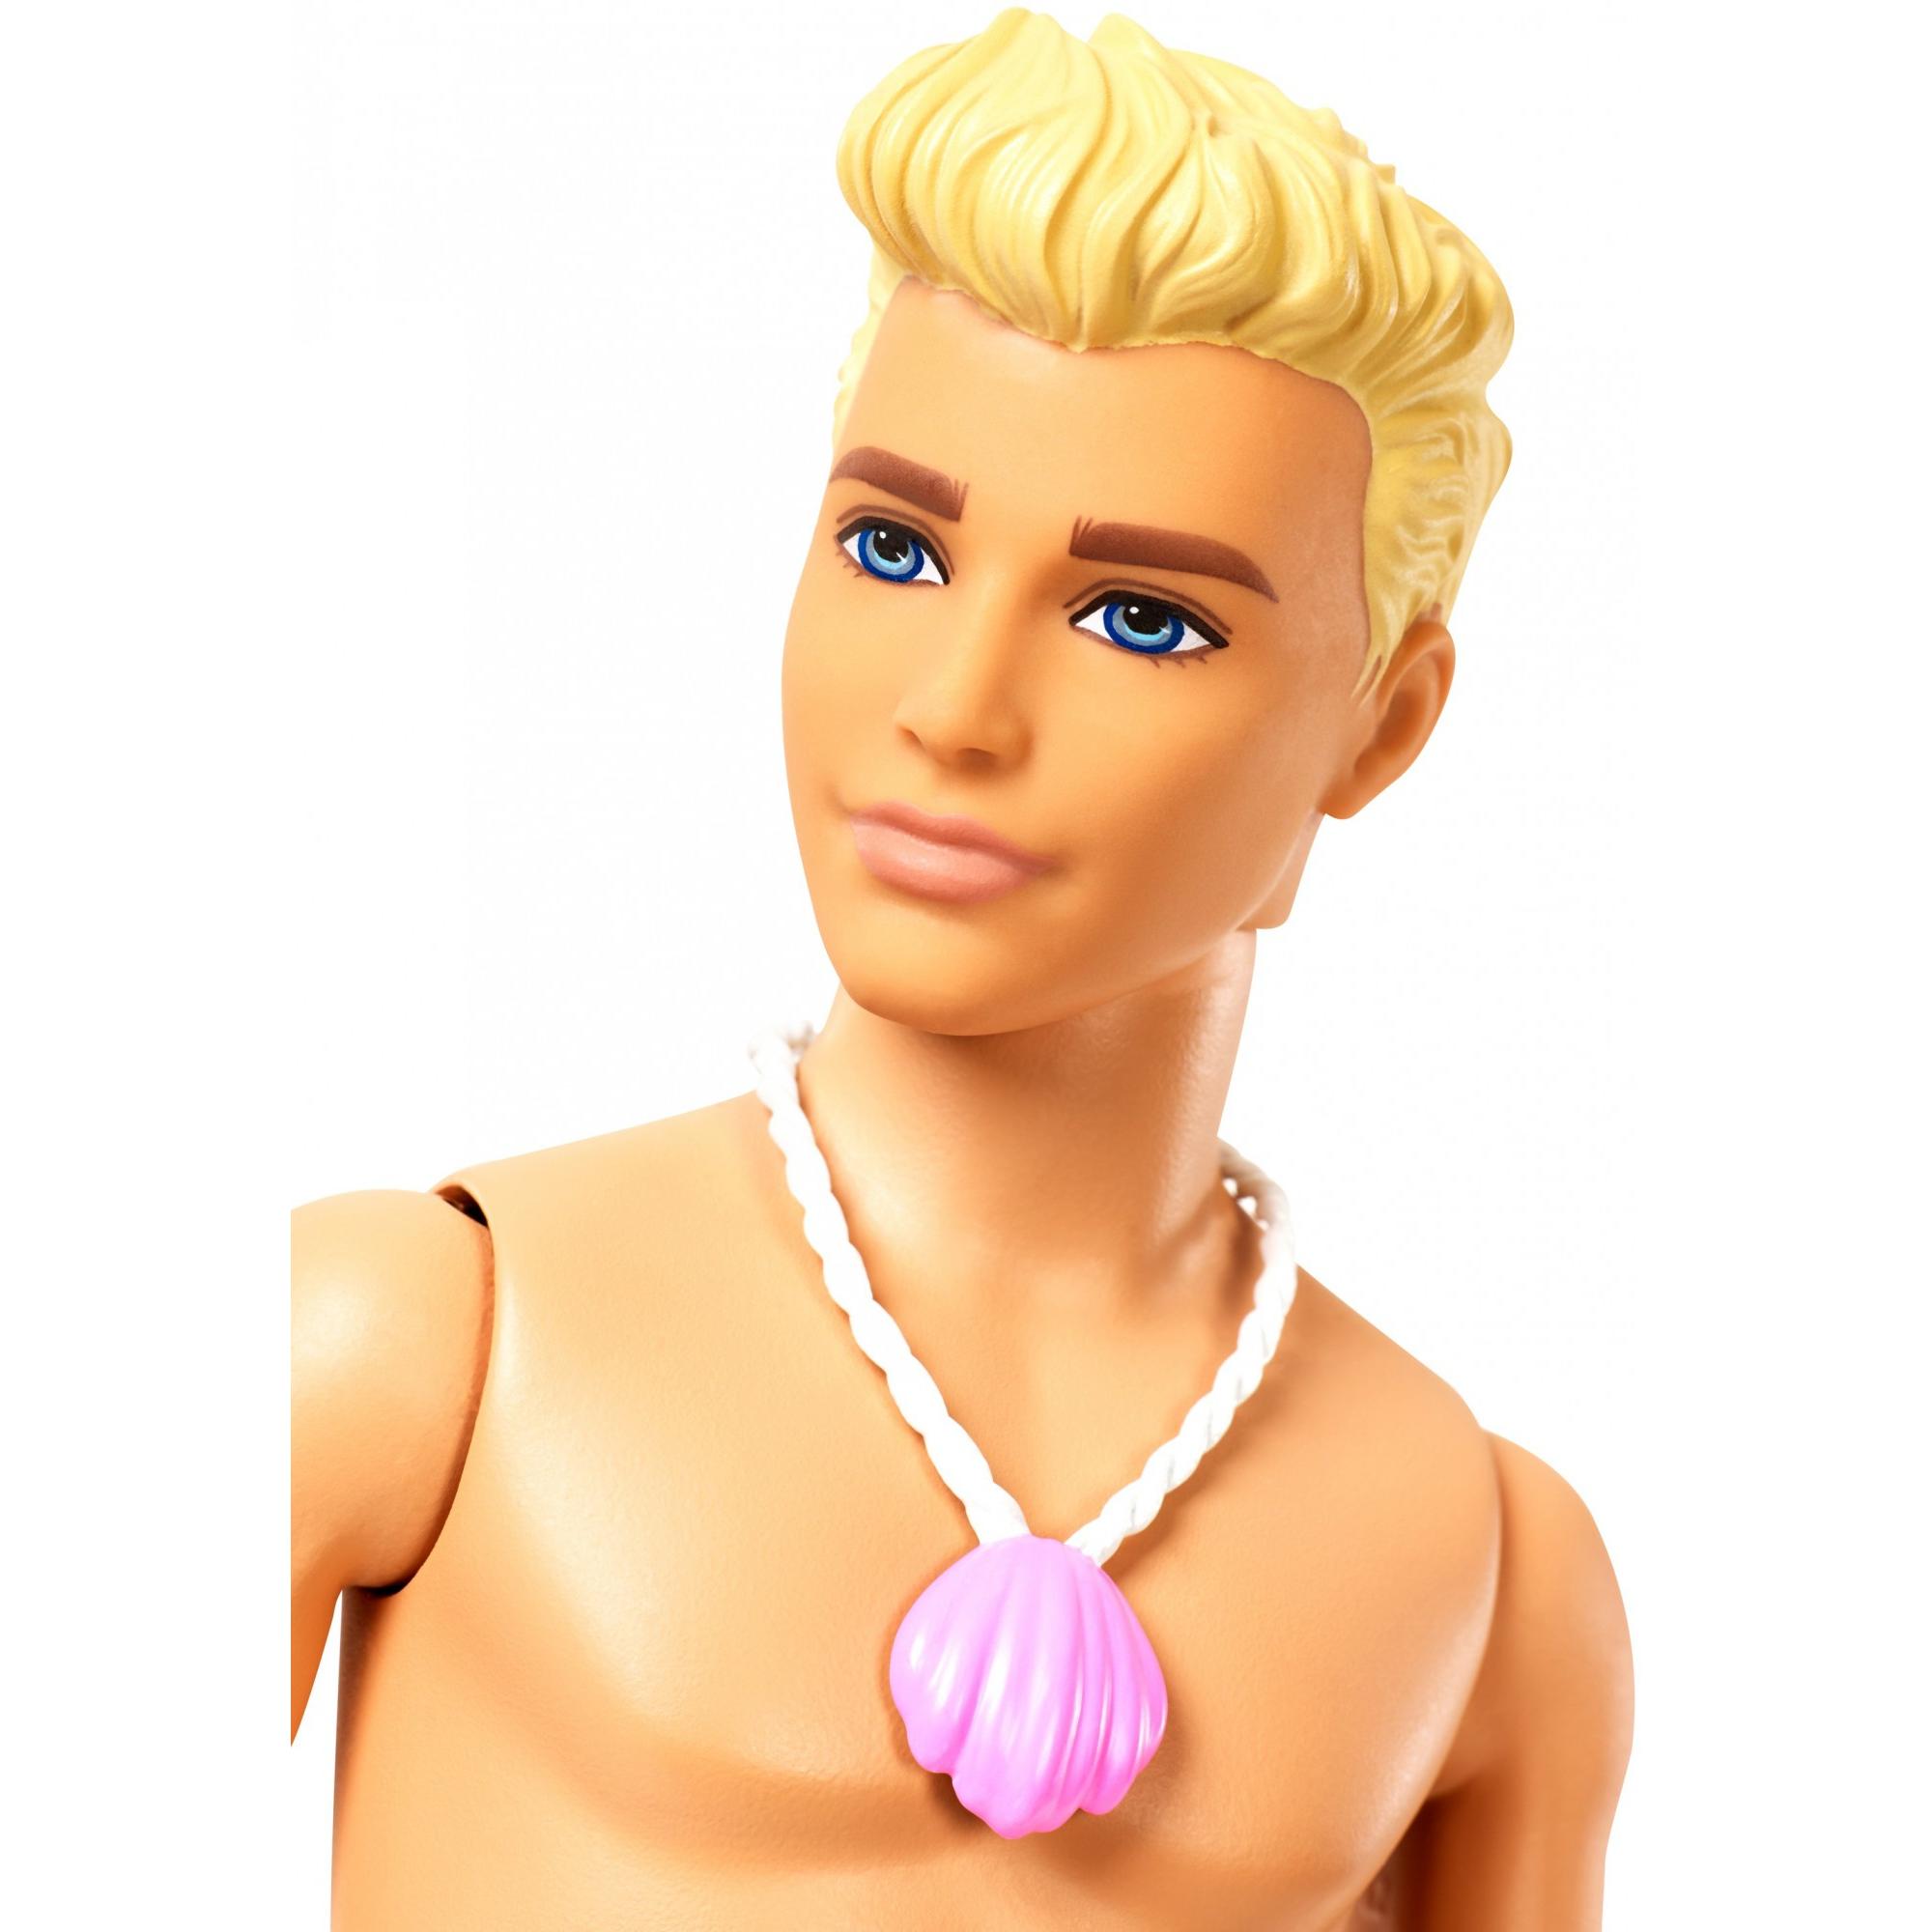 Barbie Dreamtopia Merman Doll, Blonde with Pink Seashell Necklace - image 3 of 6